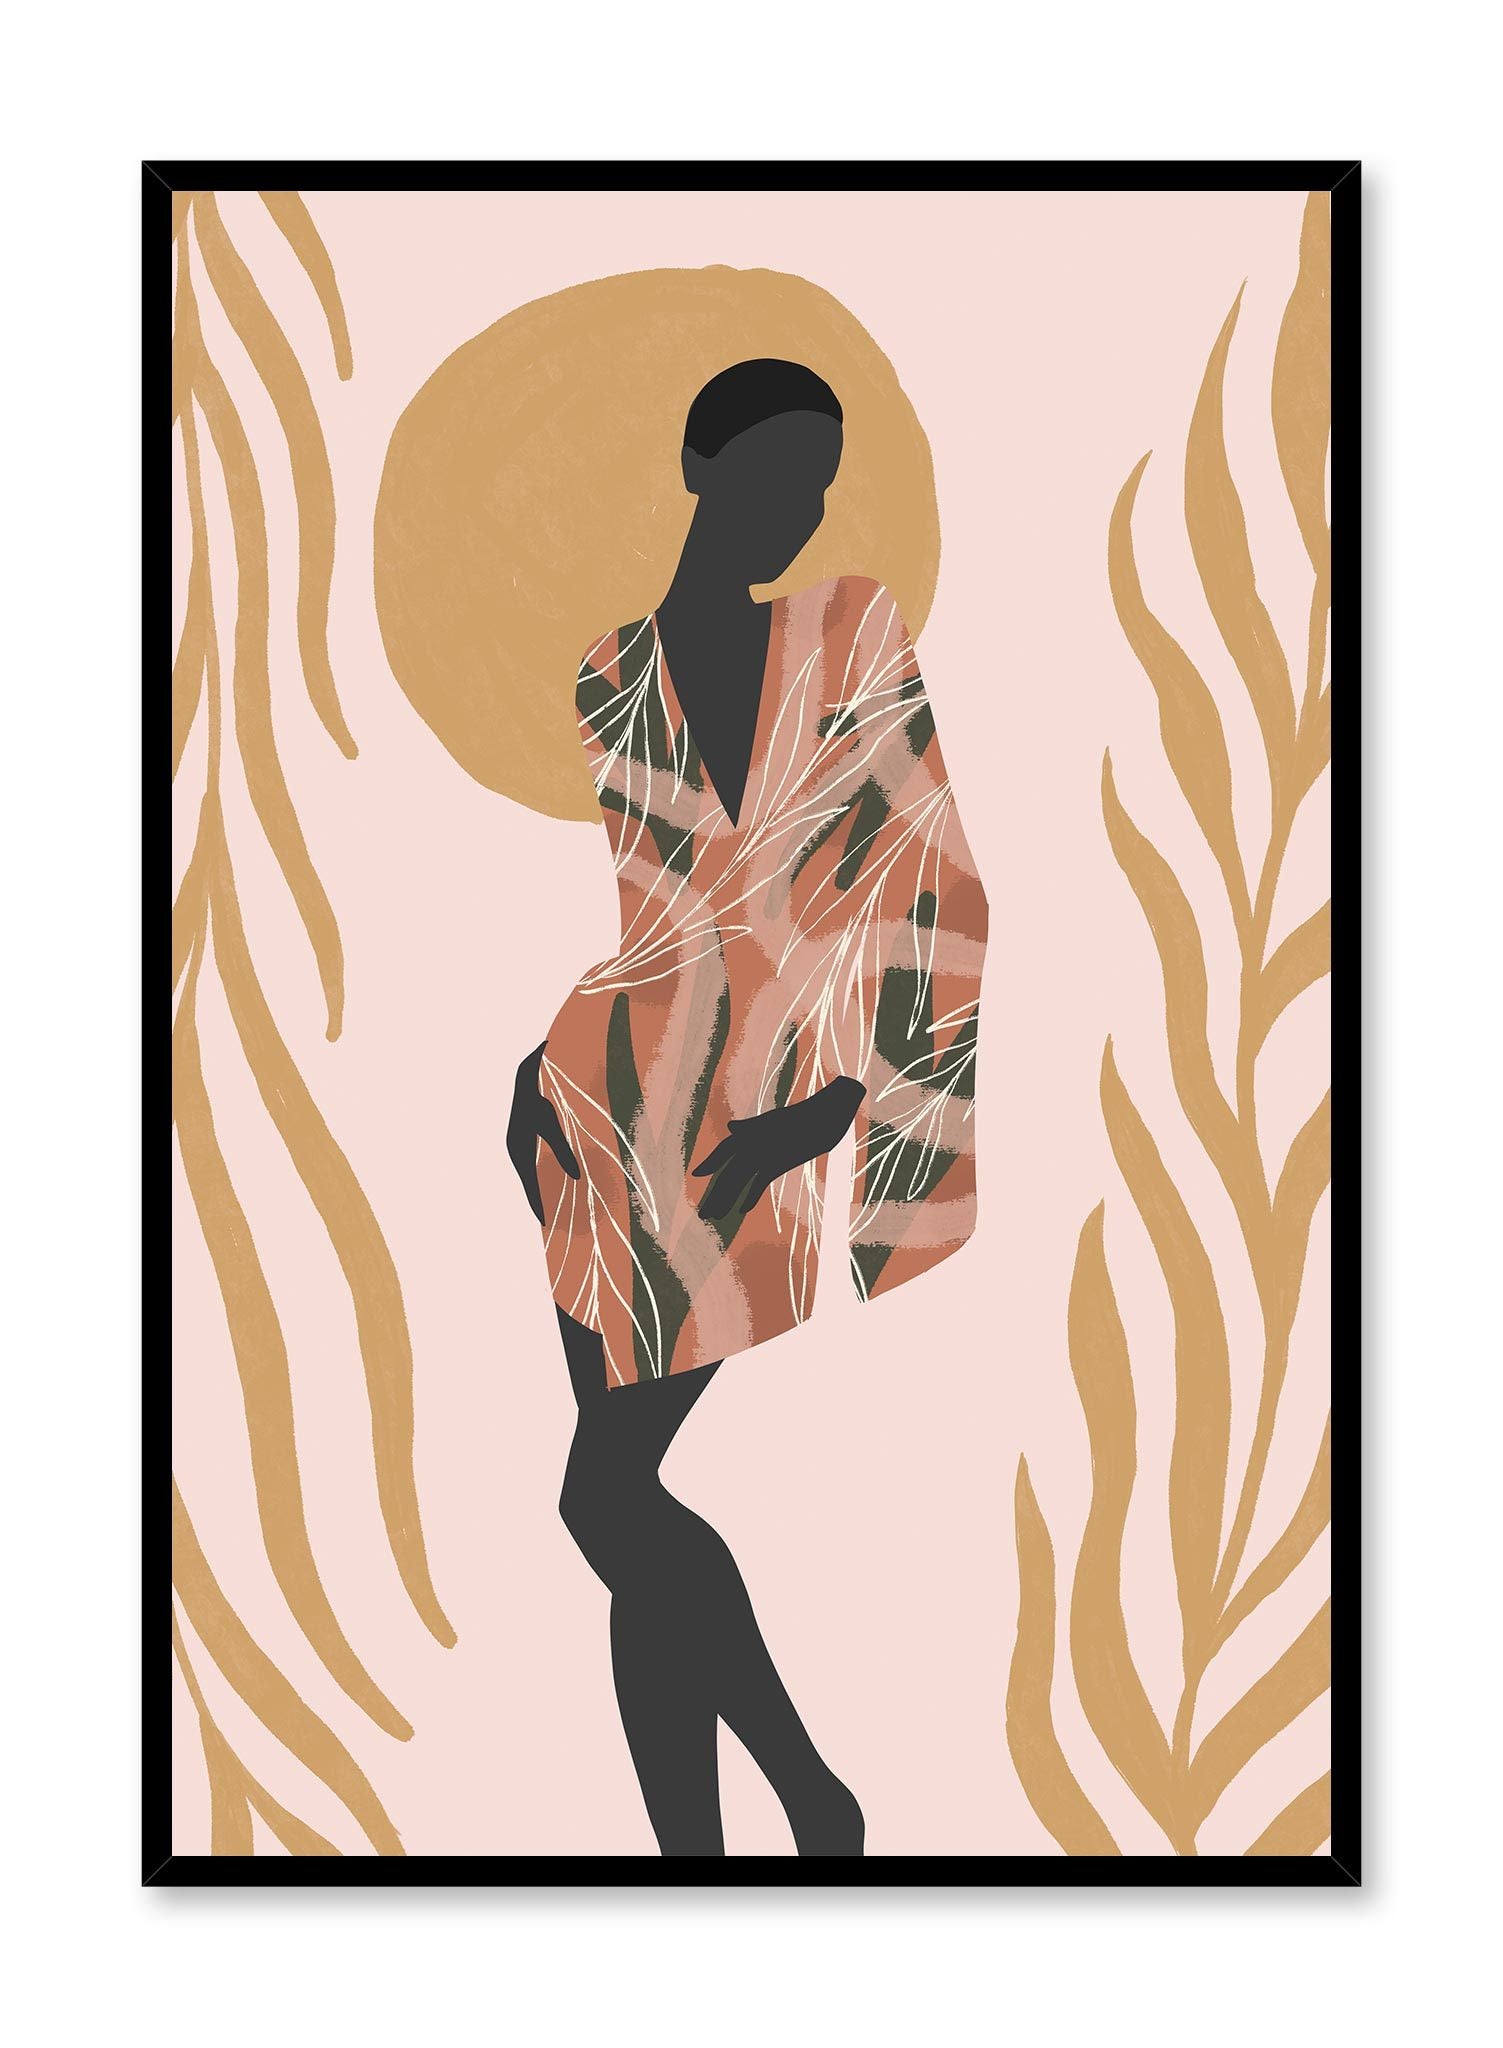 Amara is a minimalist illustration of a woman wearing a pink and green dress posing like a model by Opposite Wall.